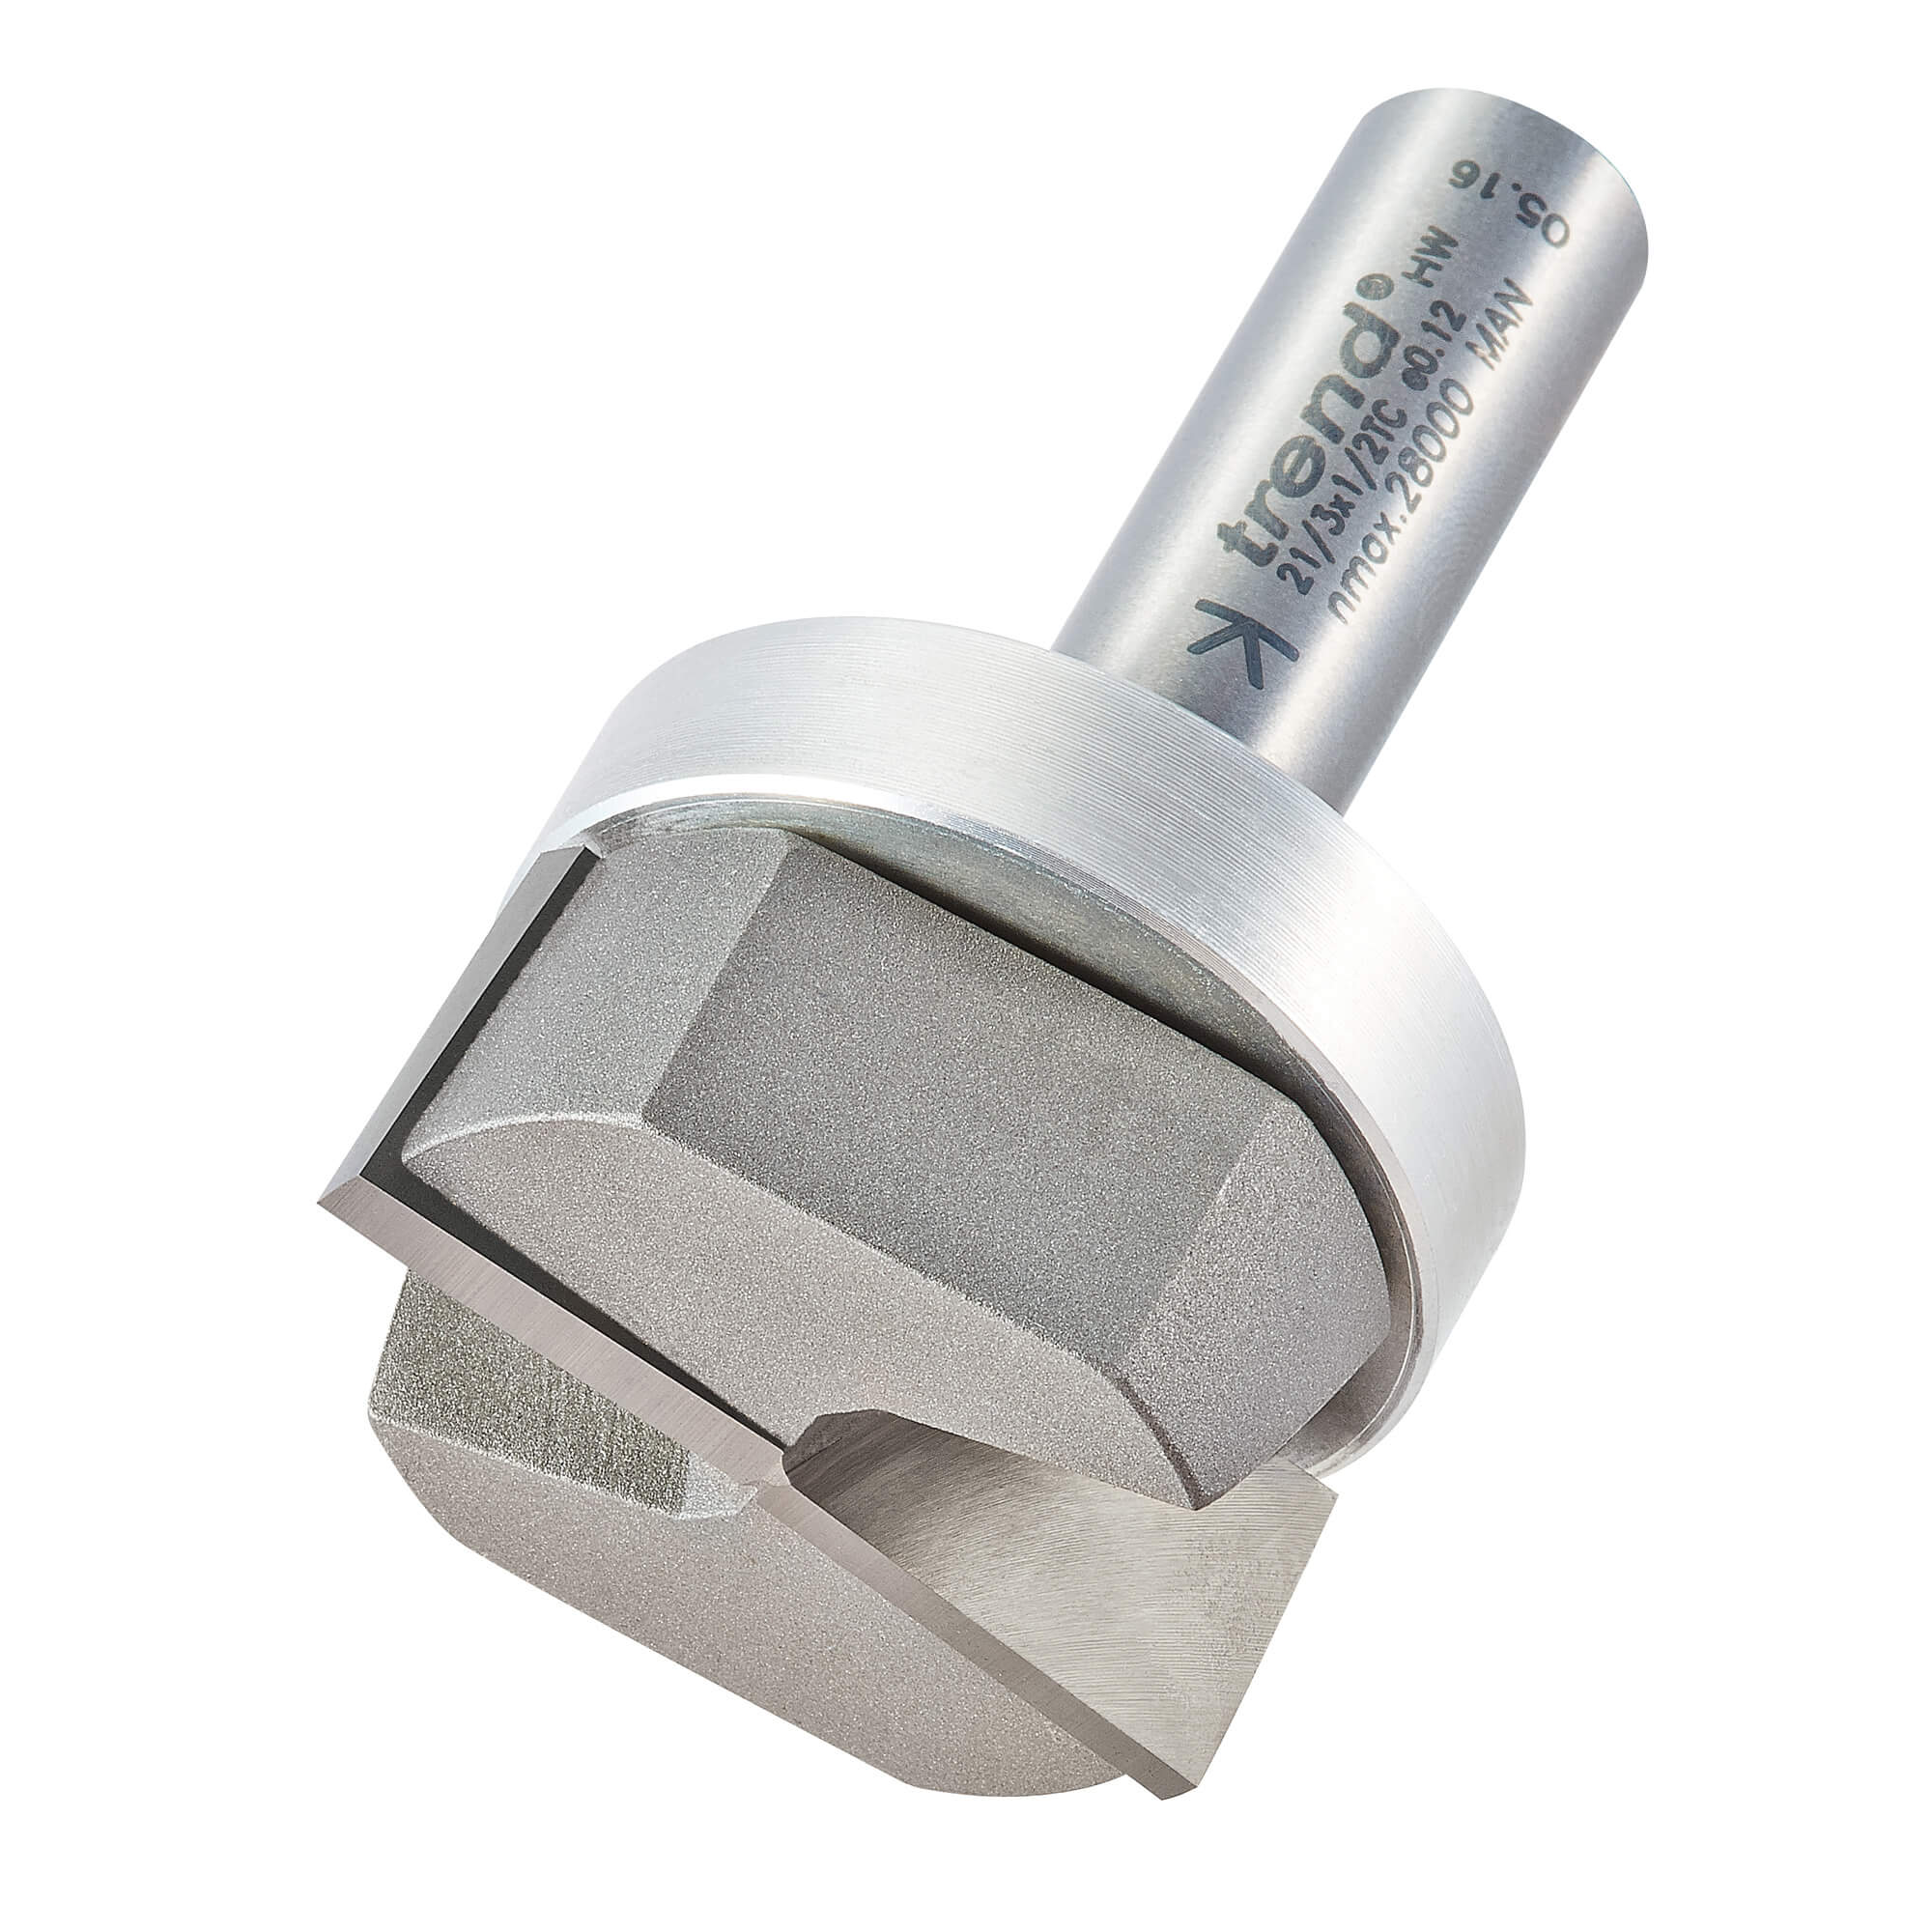 Image of Trend Bearing Guided Housing Router Cutter 38.1mm 16mm 1/4"